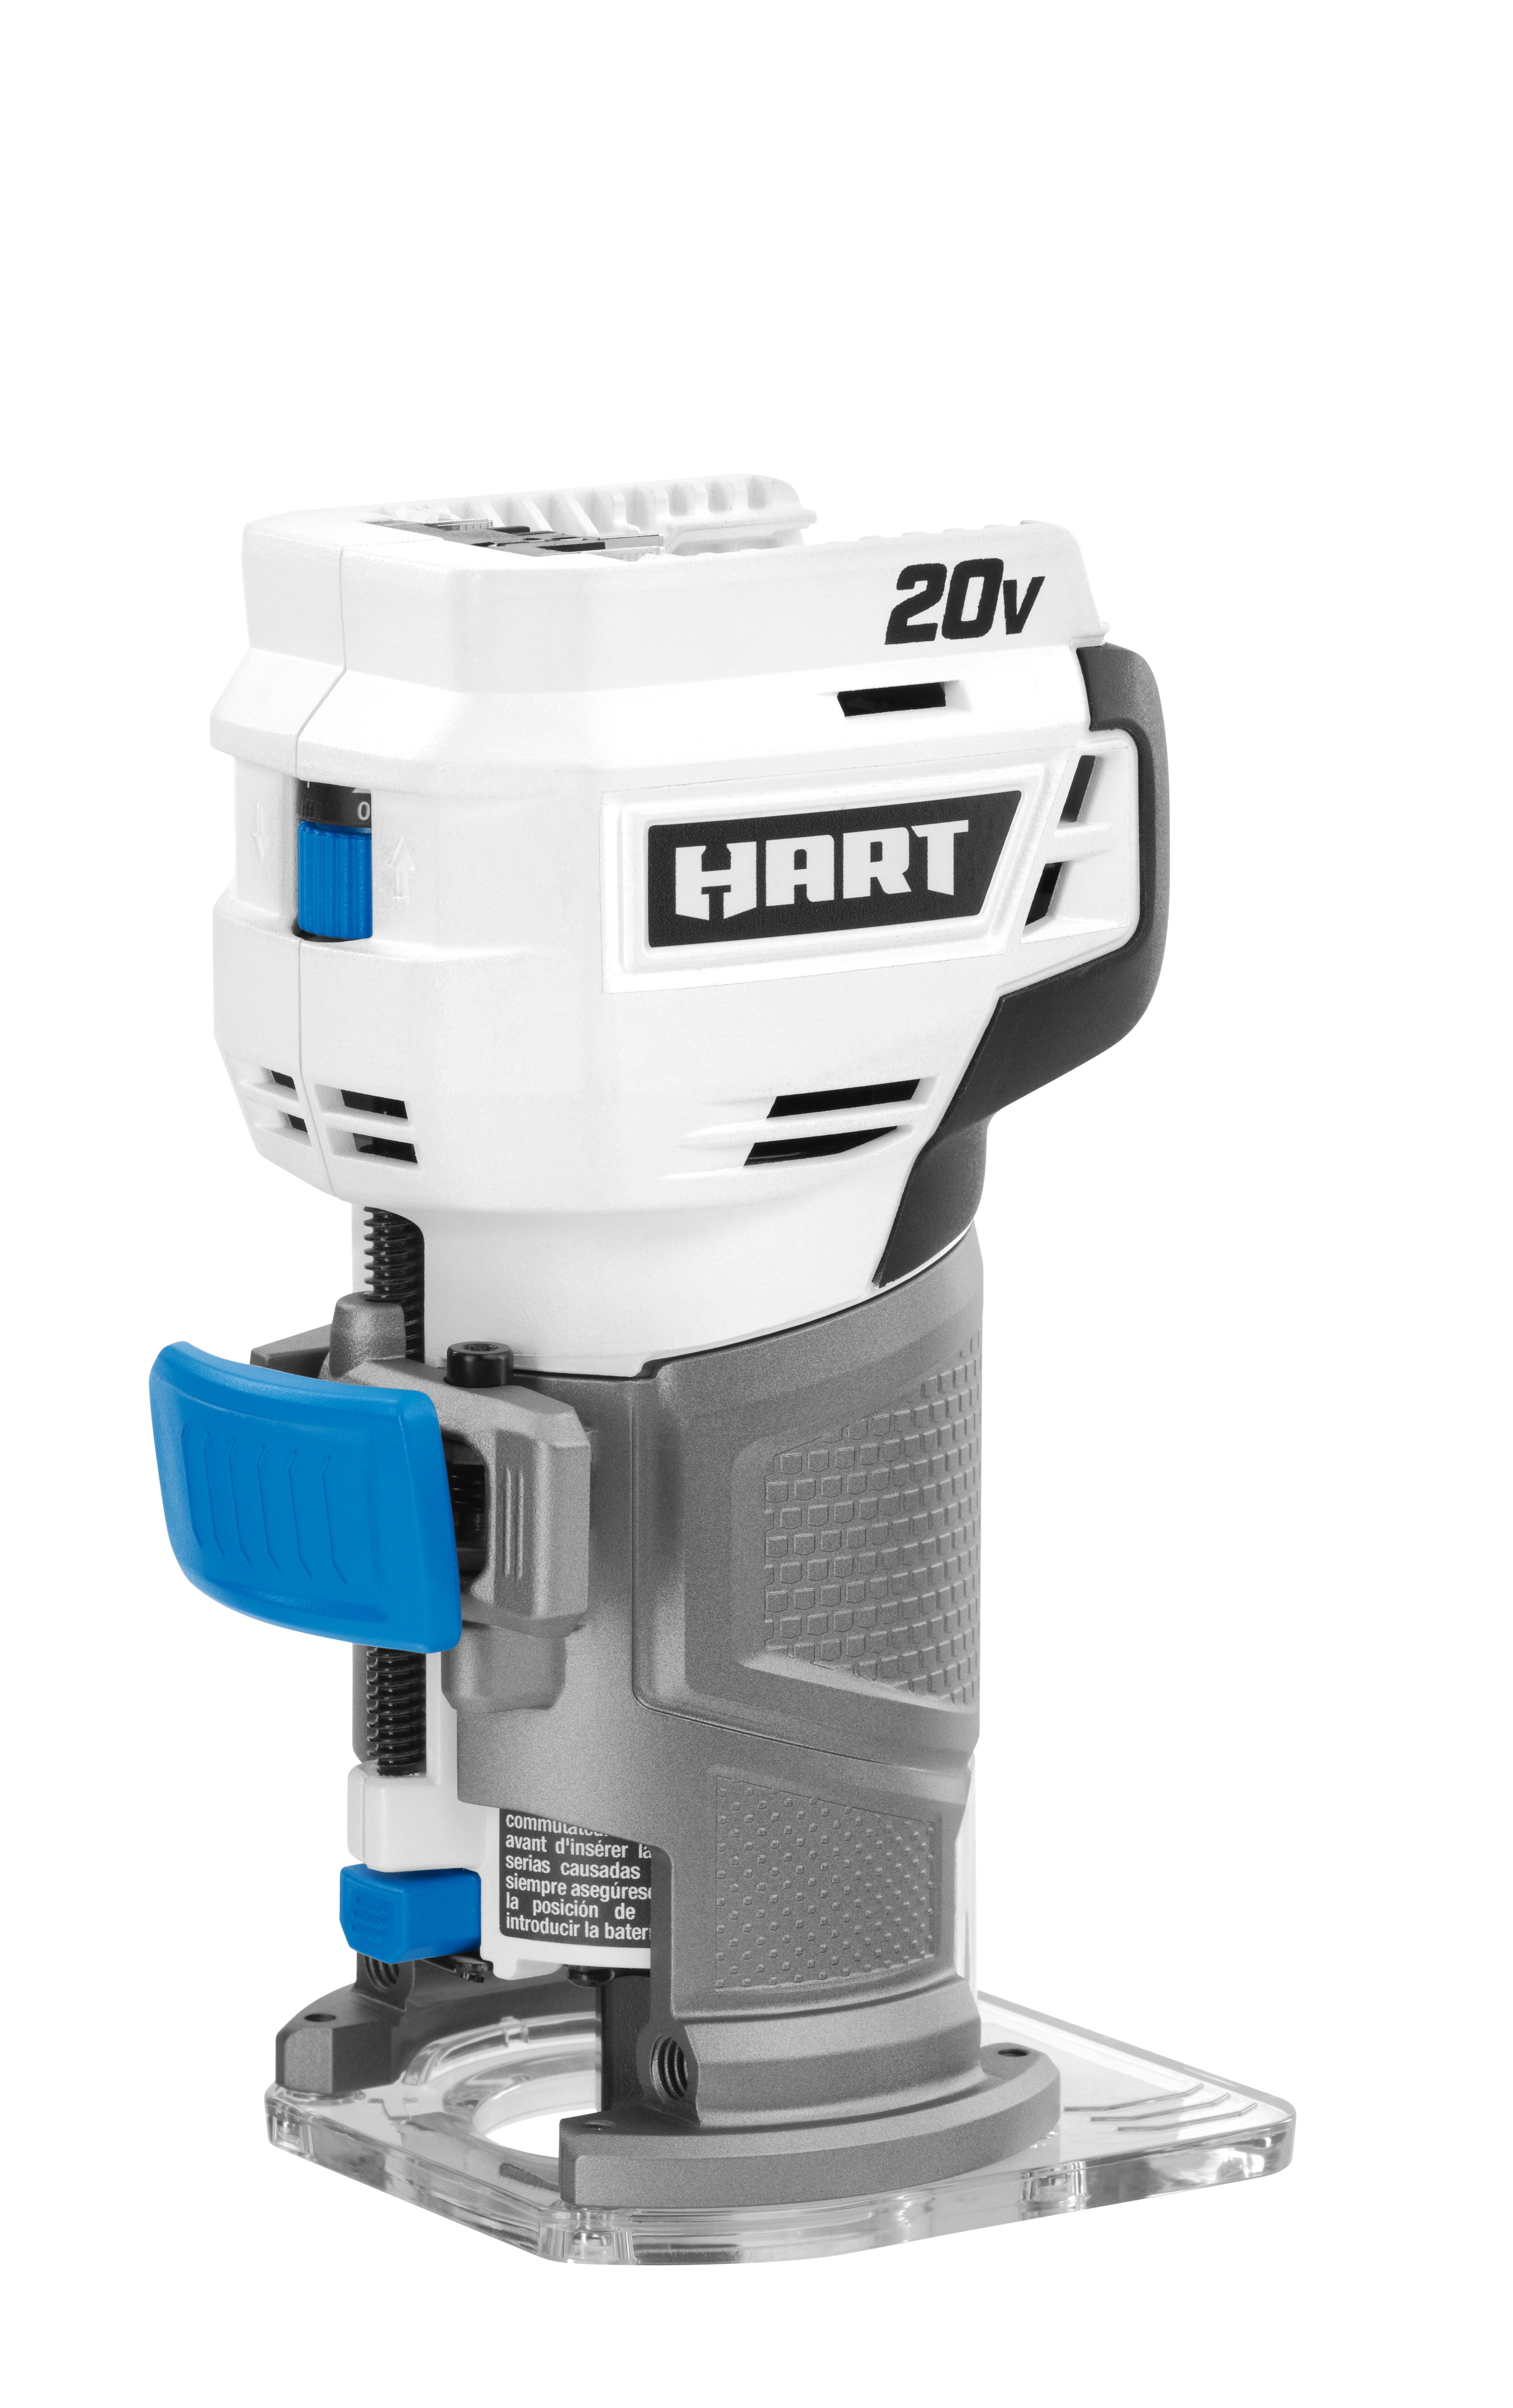 HART 20-Volt Cordless Trim Router for Cutting, Shaping and Trimming (Battery Not Included)